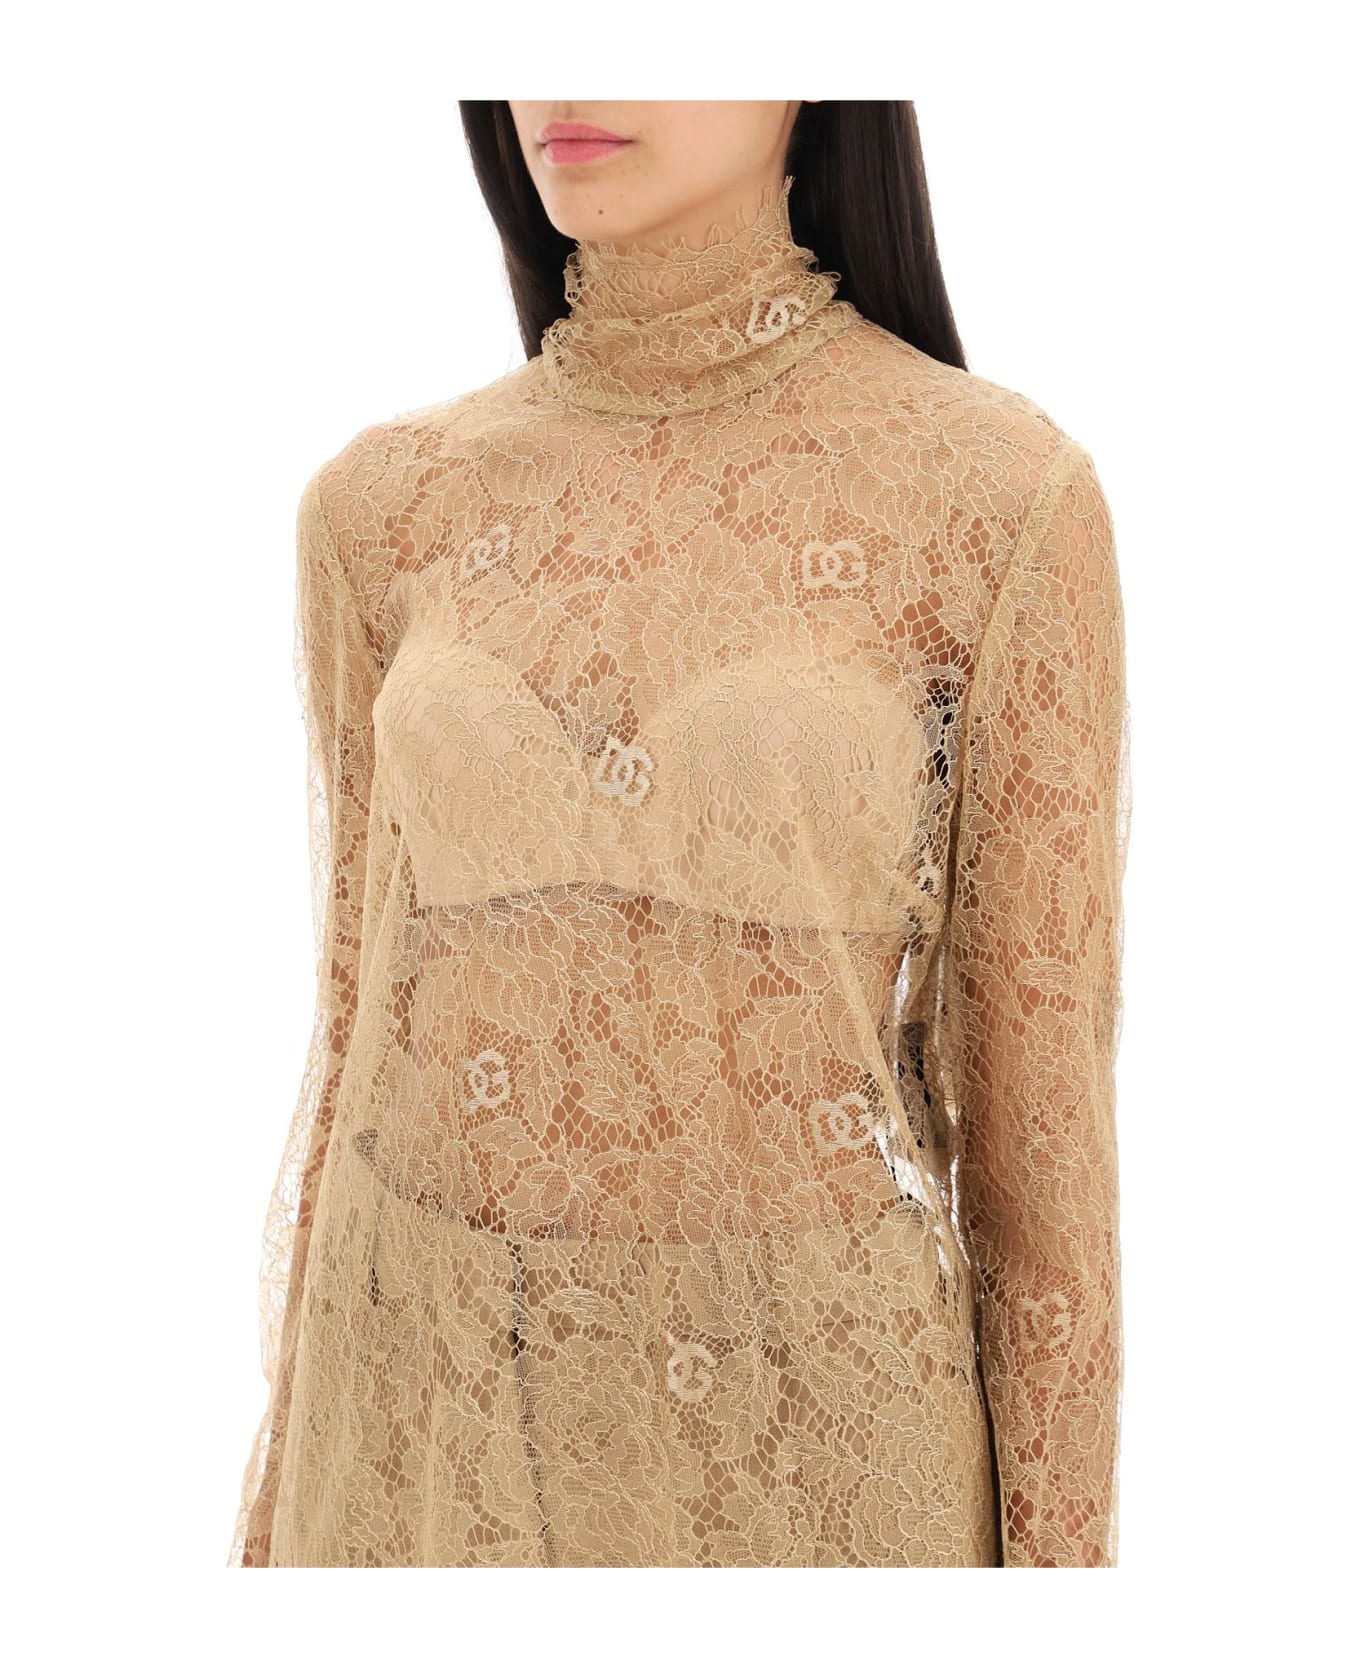 Dolce & Gabbana Blouse In Logoed Floral Lace - Beige